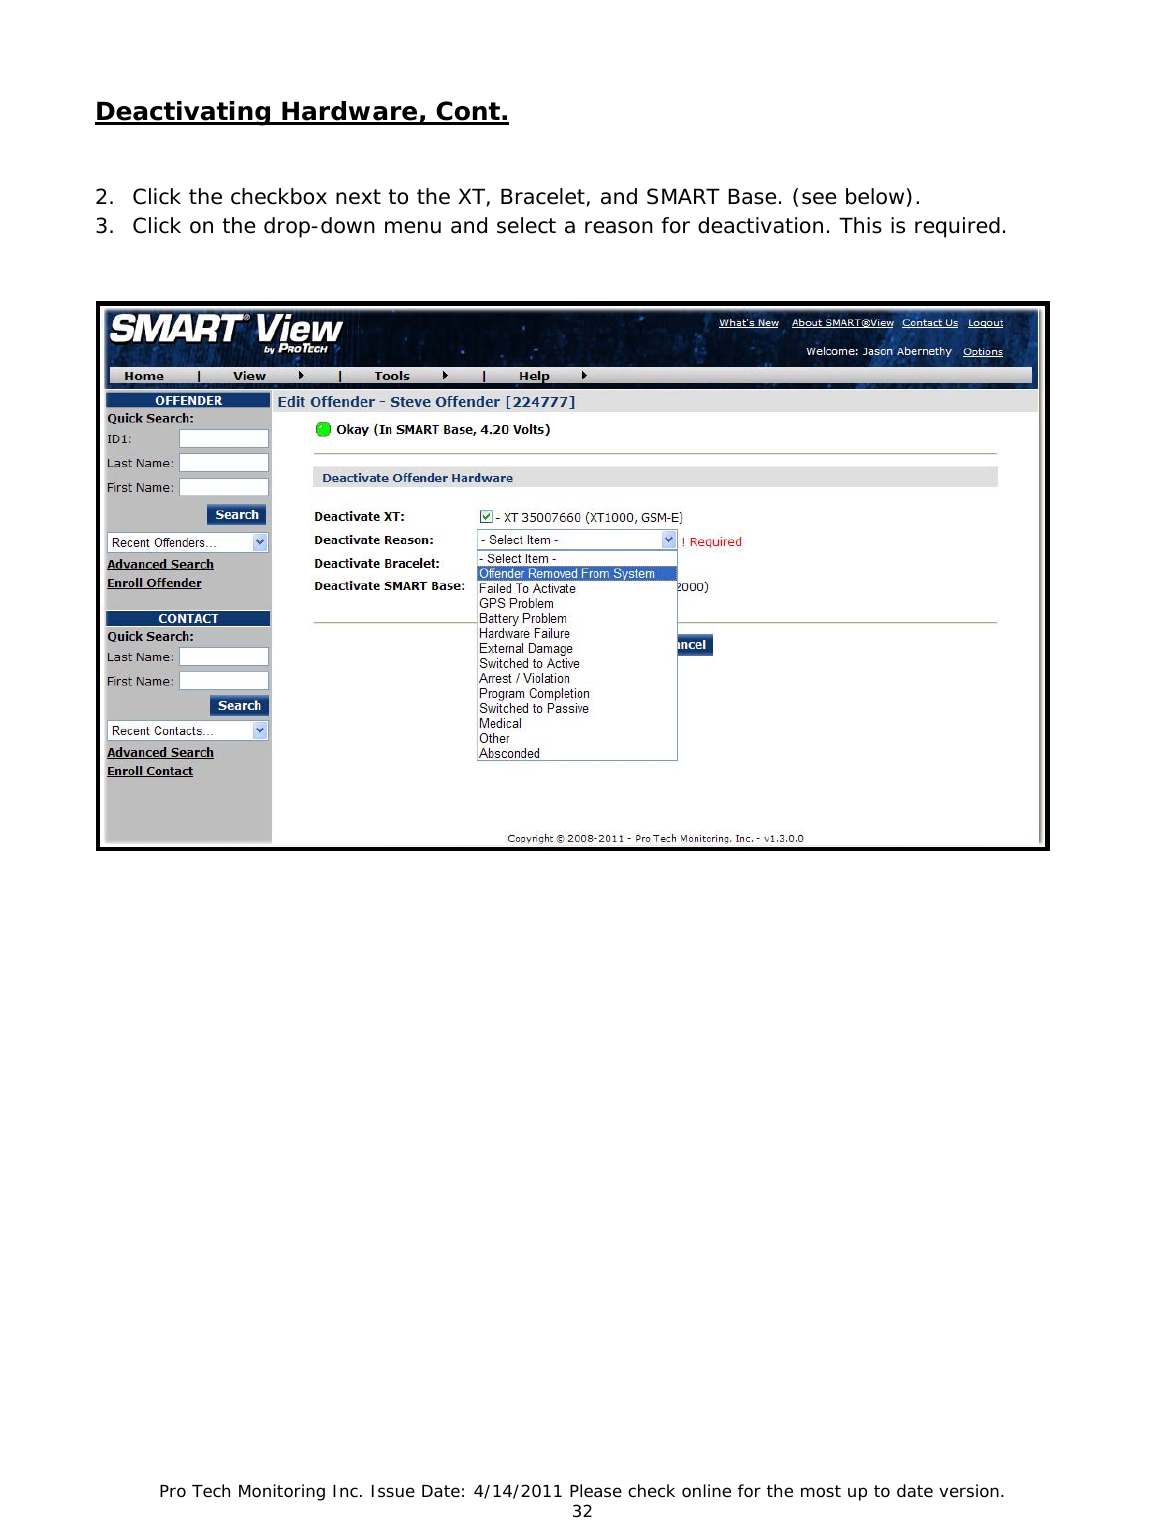 Pro Tech Monitoring Inc. Issue Date: 4/14/2011 Please check online for the most up to date version. 32  Deactivating Hardware, Cont.  2. Click the checkbox next to the XT, Bracelet, and SMART Base. (see below). 3. Click on the drop-down menu and select a reason for deactivation. This is required.  